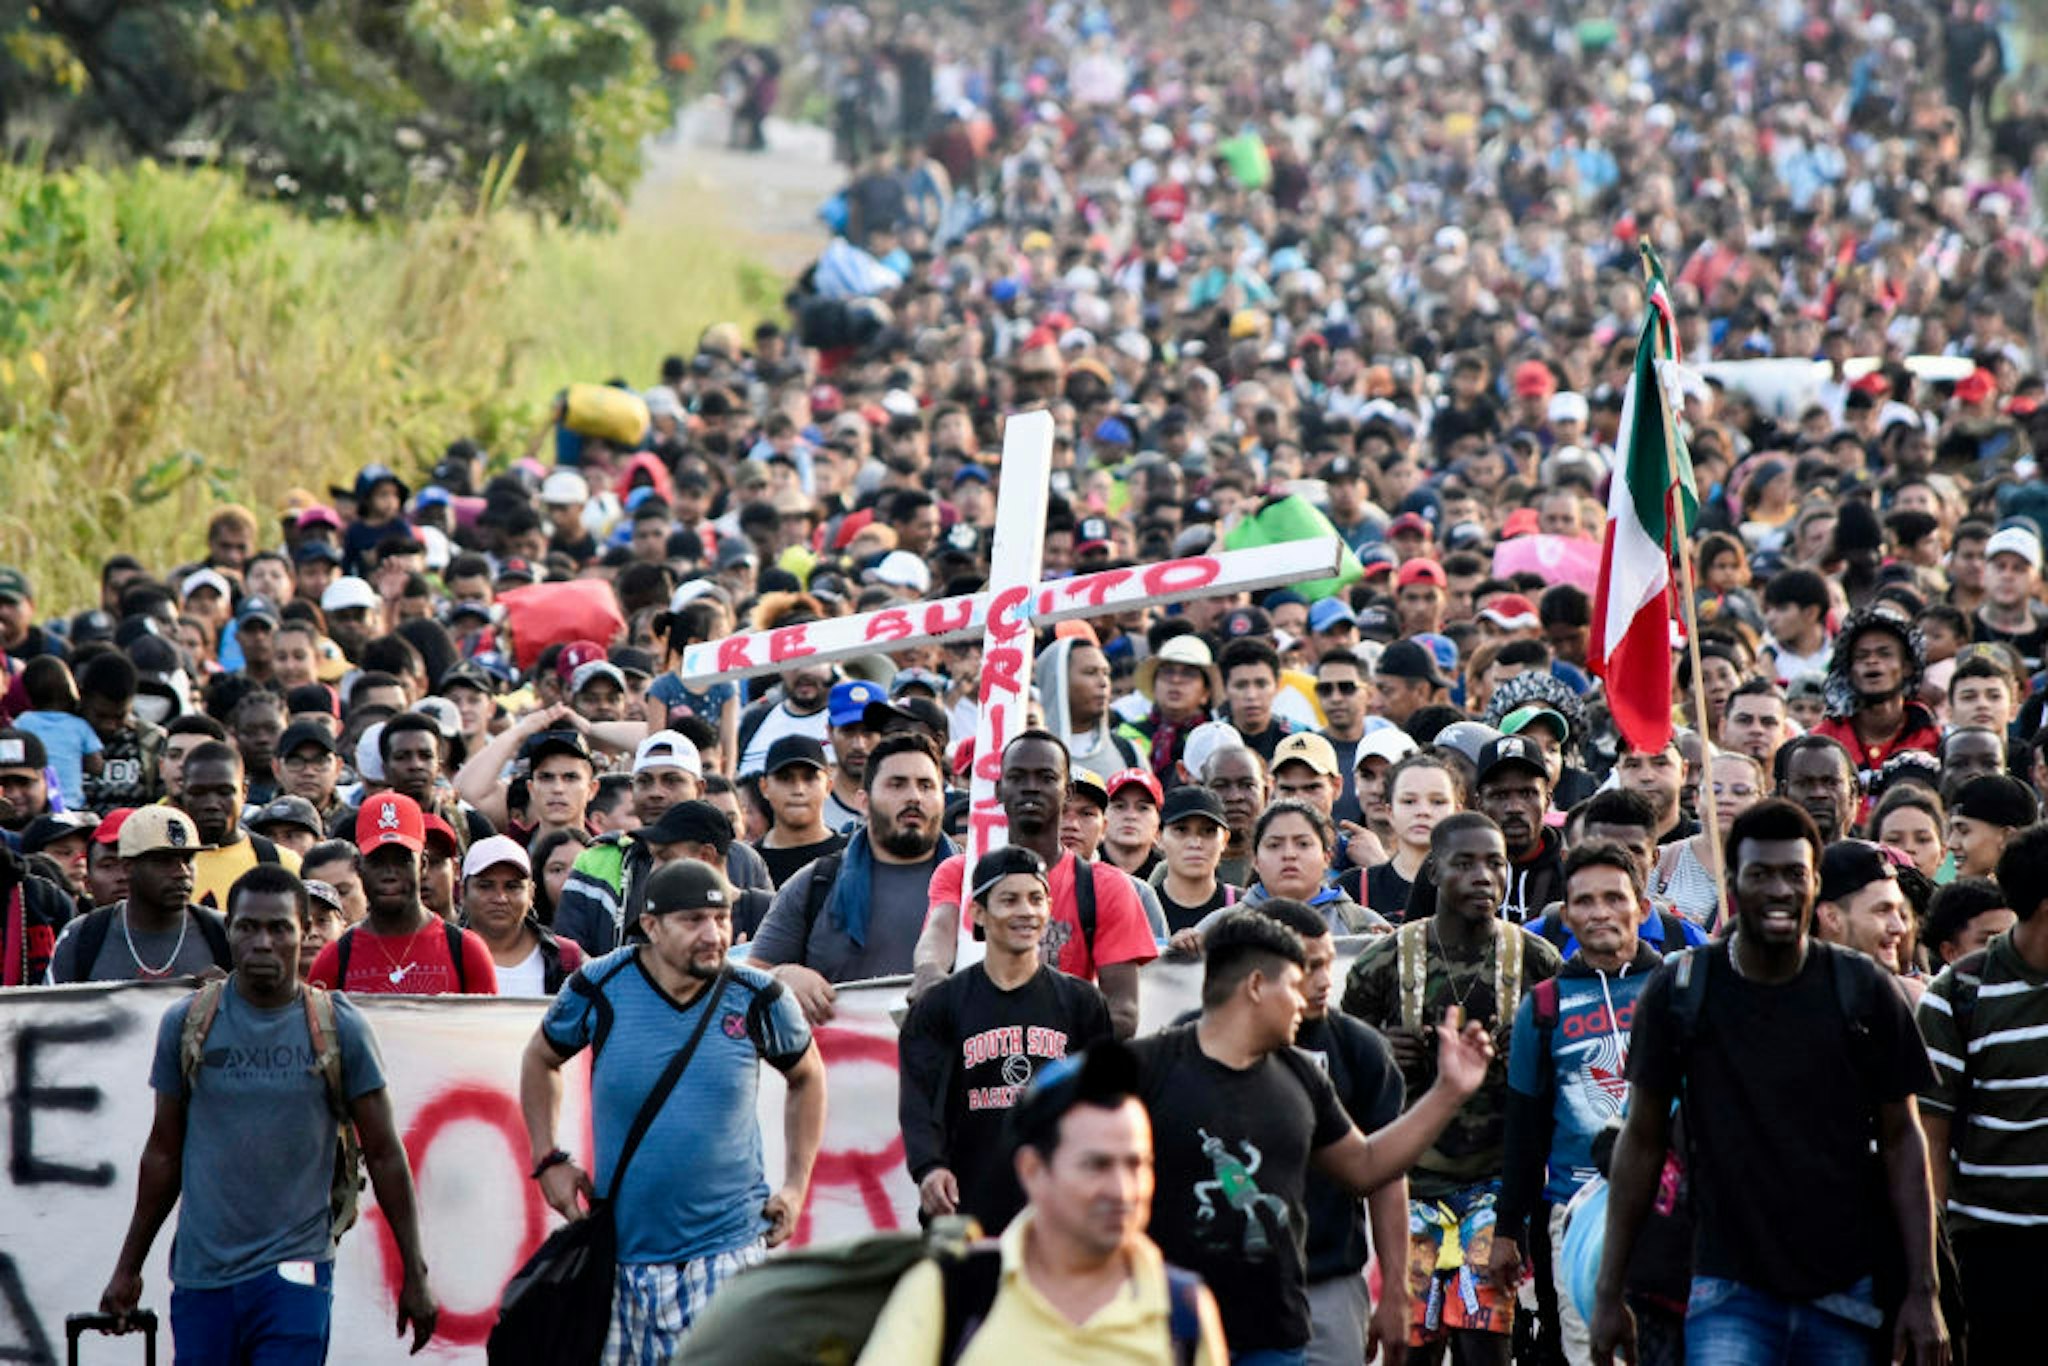 TOPSHOT - Migrants take part in a caravan towards the border with the United States in Tapachula, Chiapas State, Mexico, on December 24, 2023. Mexican President Andres Manuel Lopez Obrador on December 22 said that his government would step up efforts to contain irregular migration flows. Lopez Obrador said the "extraordinary" migration situation would be the focus of talks with Secretary of State Antony Blinken and other senior US officials in Mexico City on Wednesday.